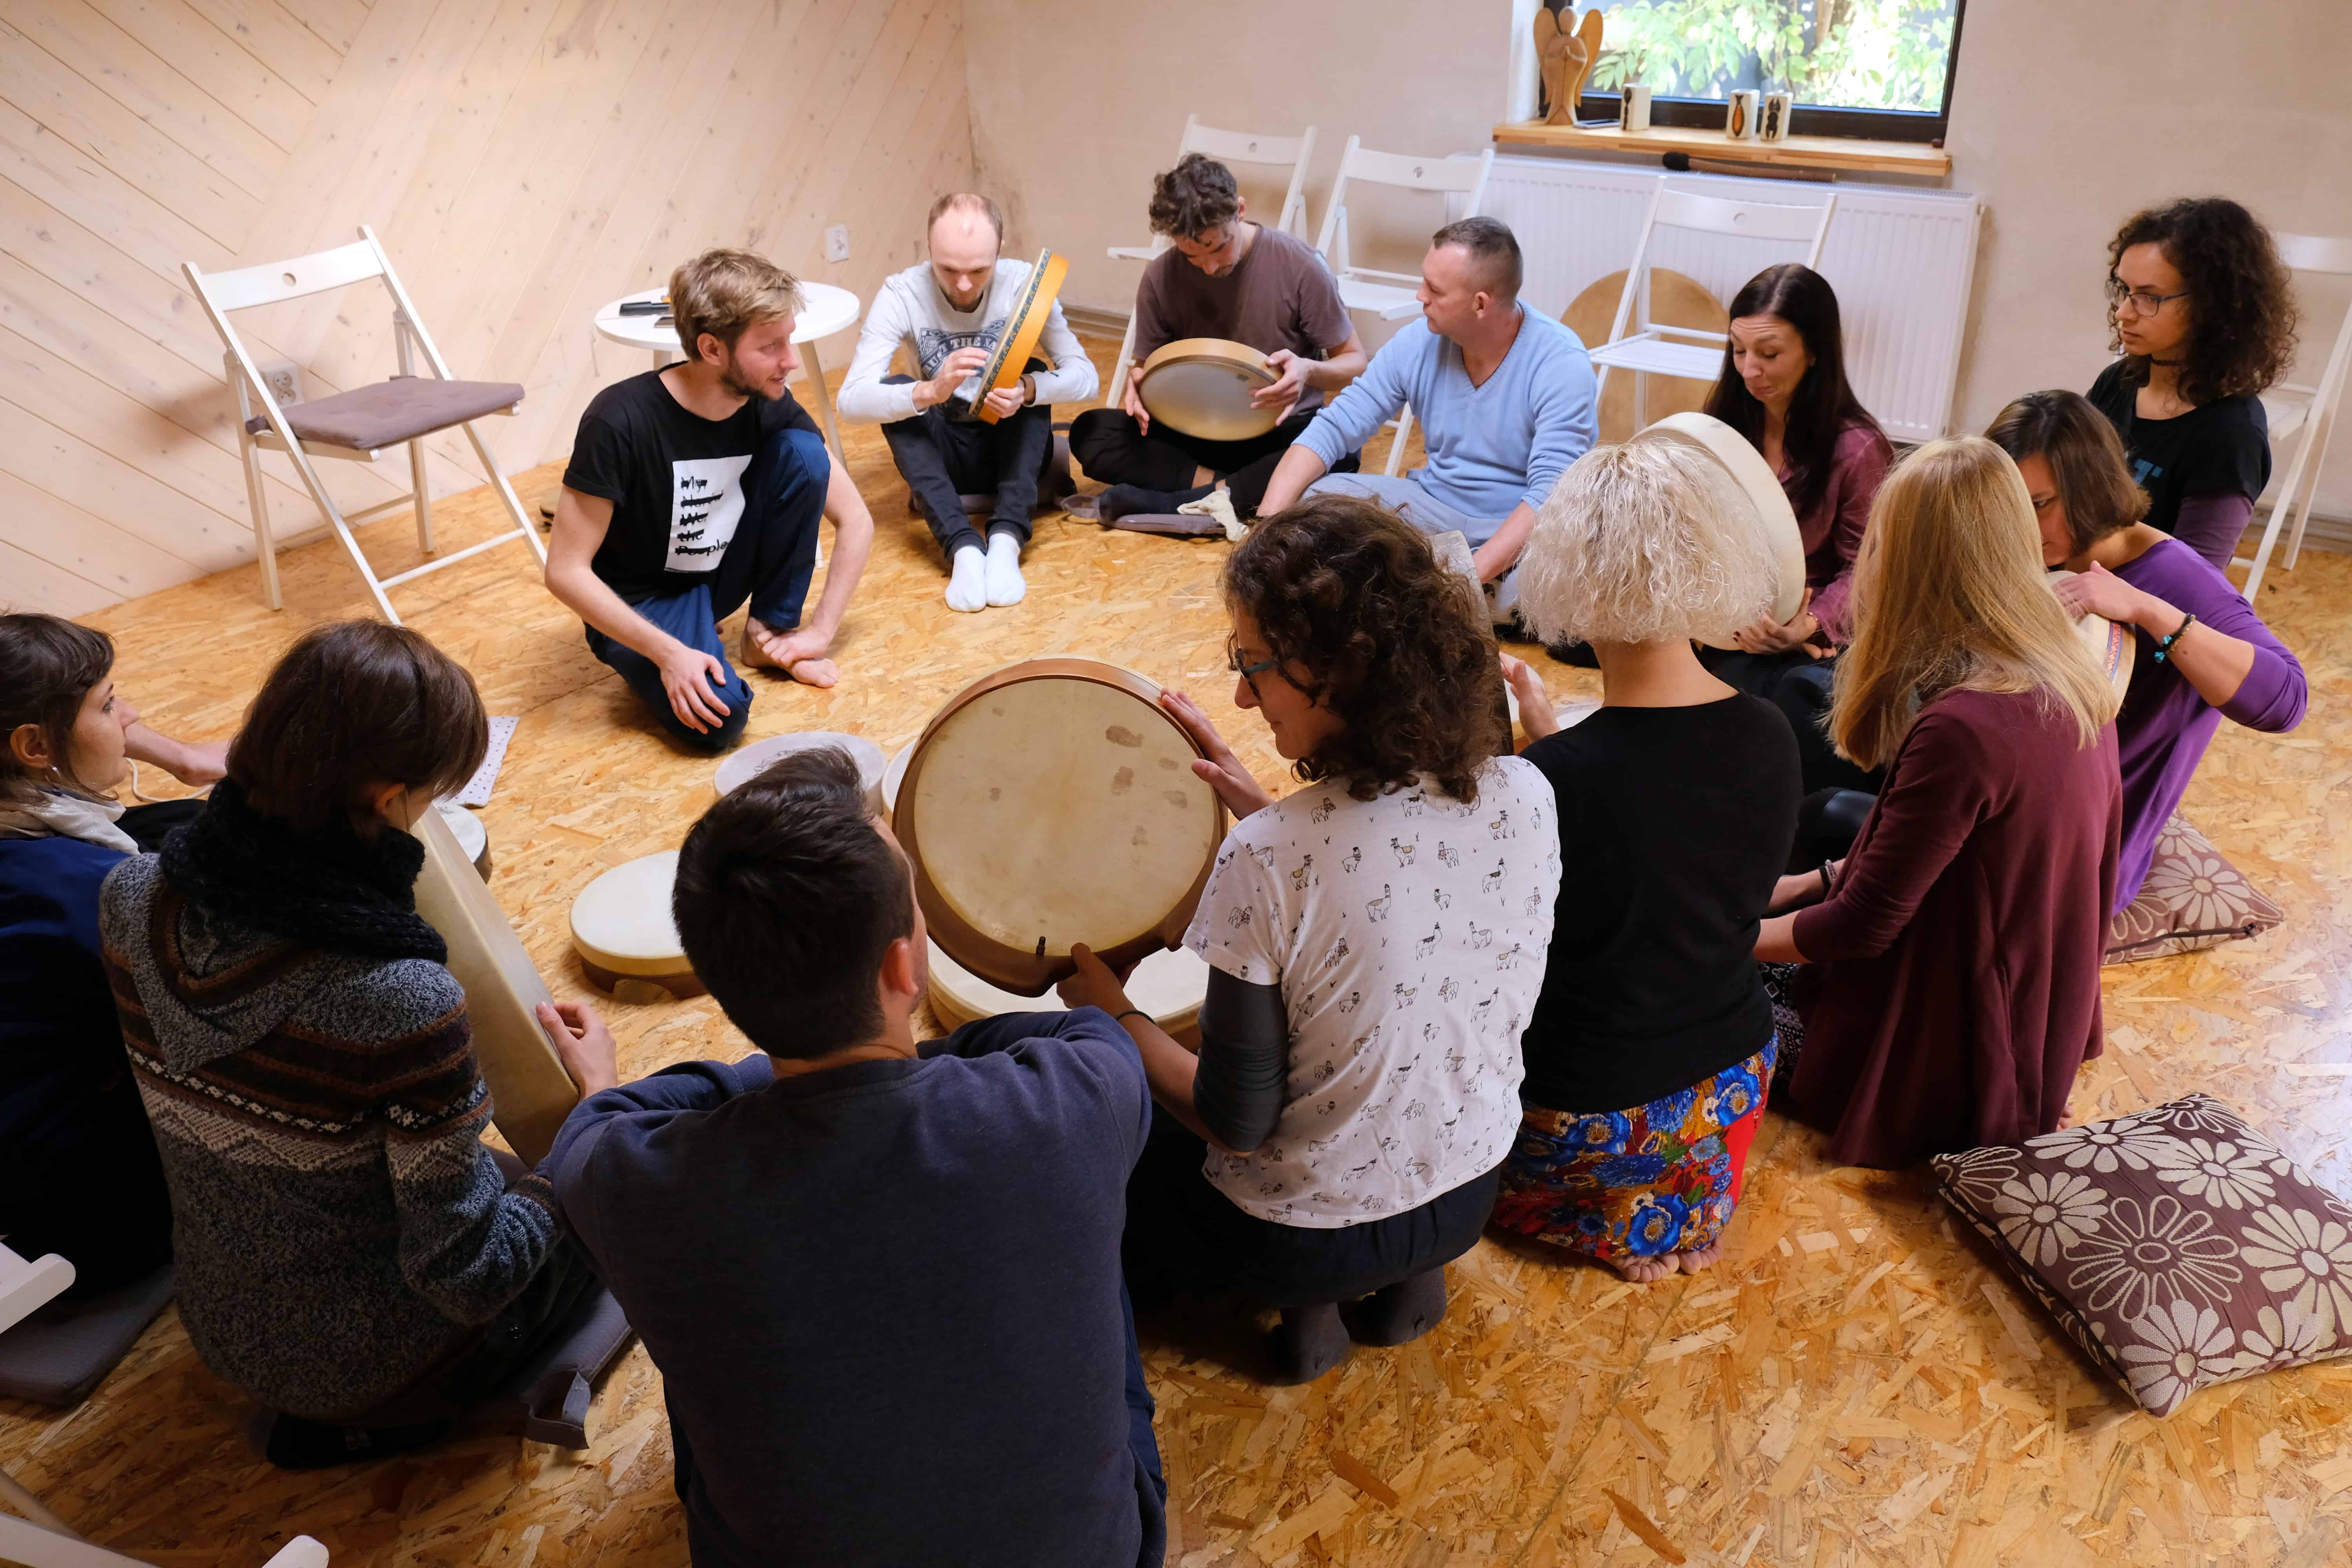 Basics of Frame Drum: introductory class in Berlin (4.05)